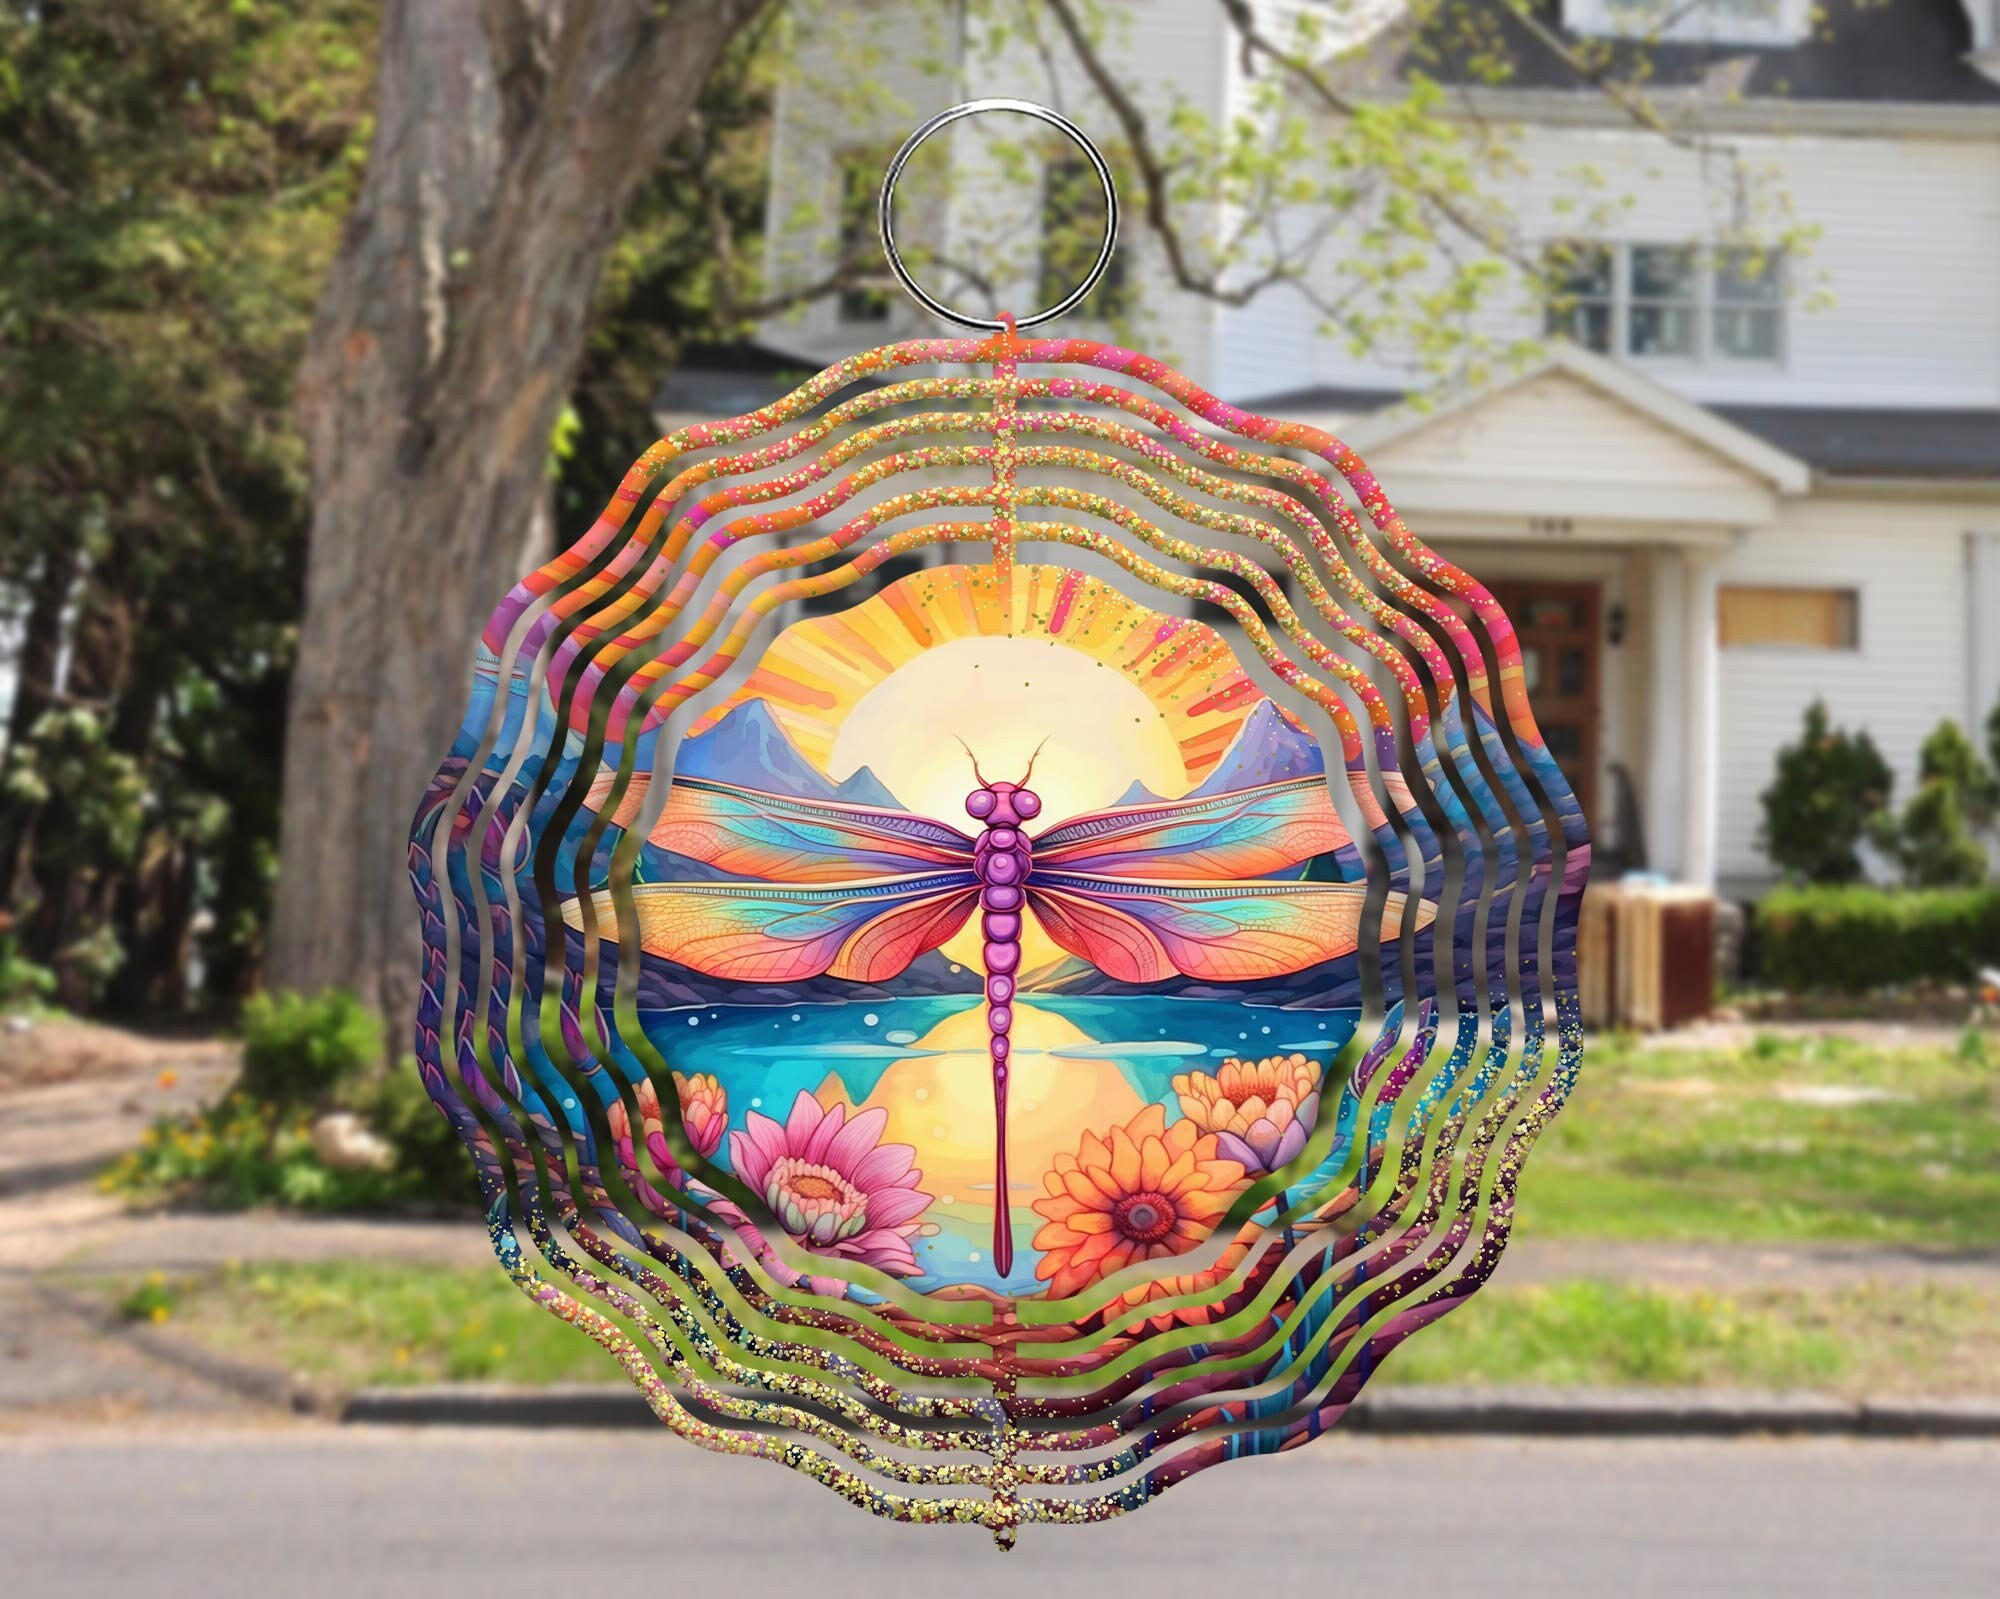 3D Colorful Dragonfly Wind Spinner For Yard And Garden, Outdoor Garden Yard Decoration, Garden Decor, Chime Art Gift